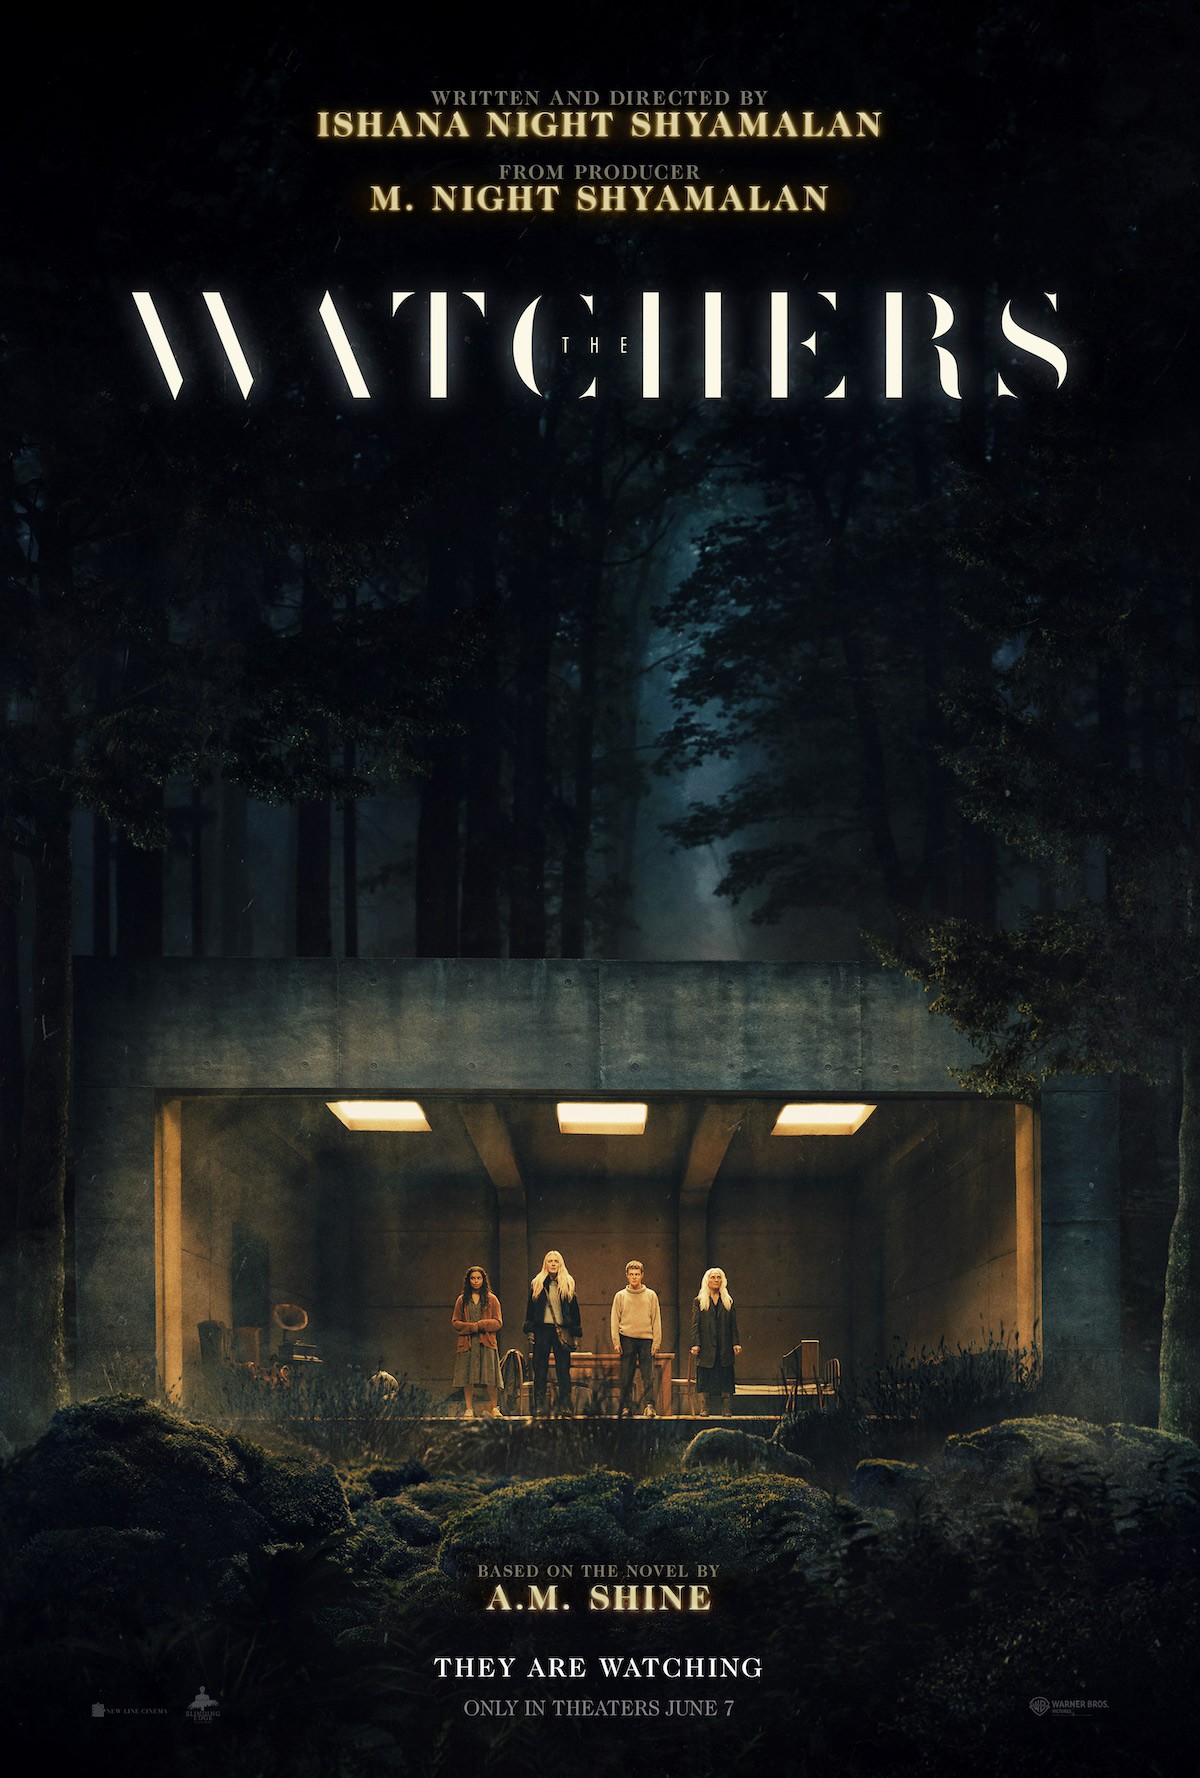 Dakota Fanning is back in this new horror thriller that follows Mina, an artist who gets stranded in a huge, untouched Irish forest. Things take a turn for the better when Mina finds shelter with three strangers — until she learns they're being watched by mysterious creatures every single night. <em>The Watchers hits theaters June 7, and stars</em><em> Dakota Fanning, Georgina Campbell, Oliver Finnegan, and Olwen Fouere.</em>